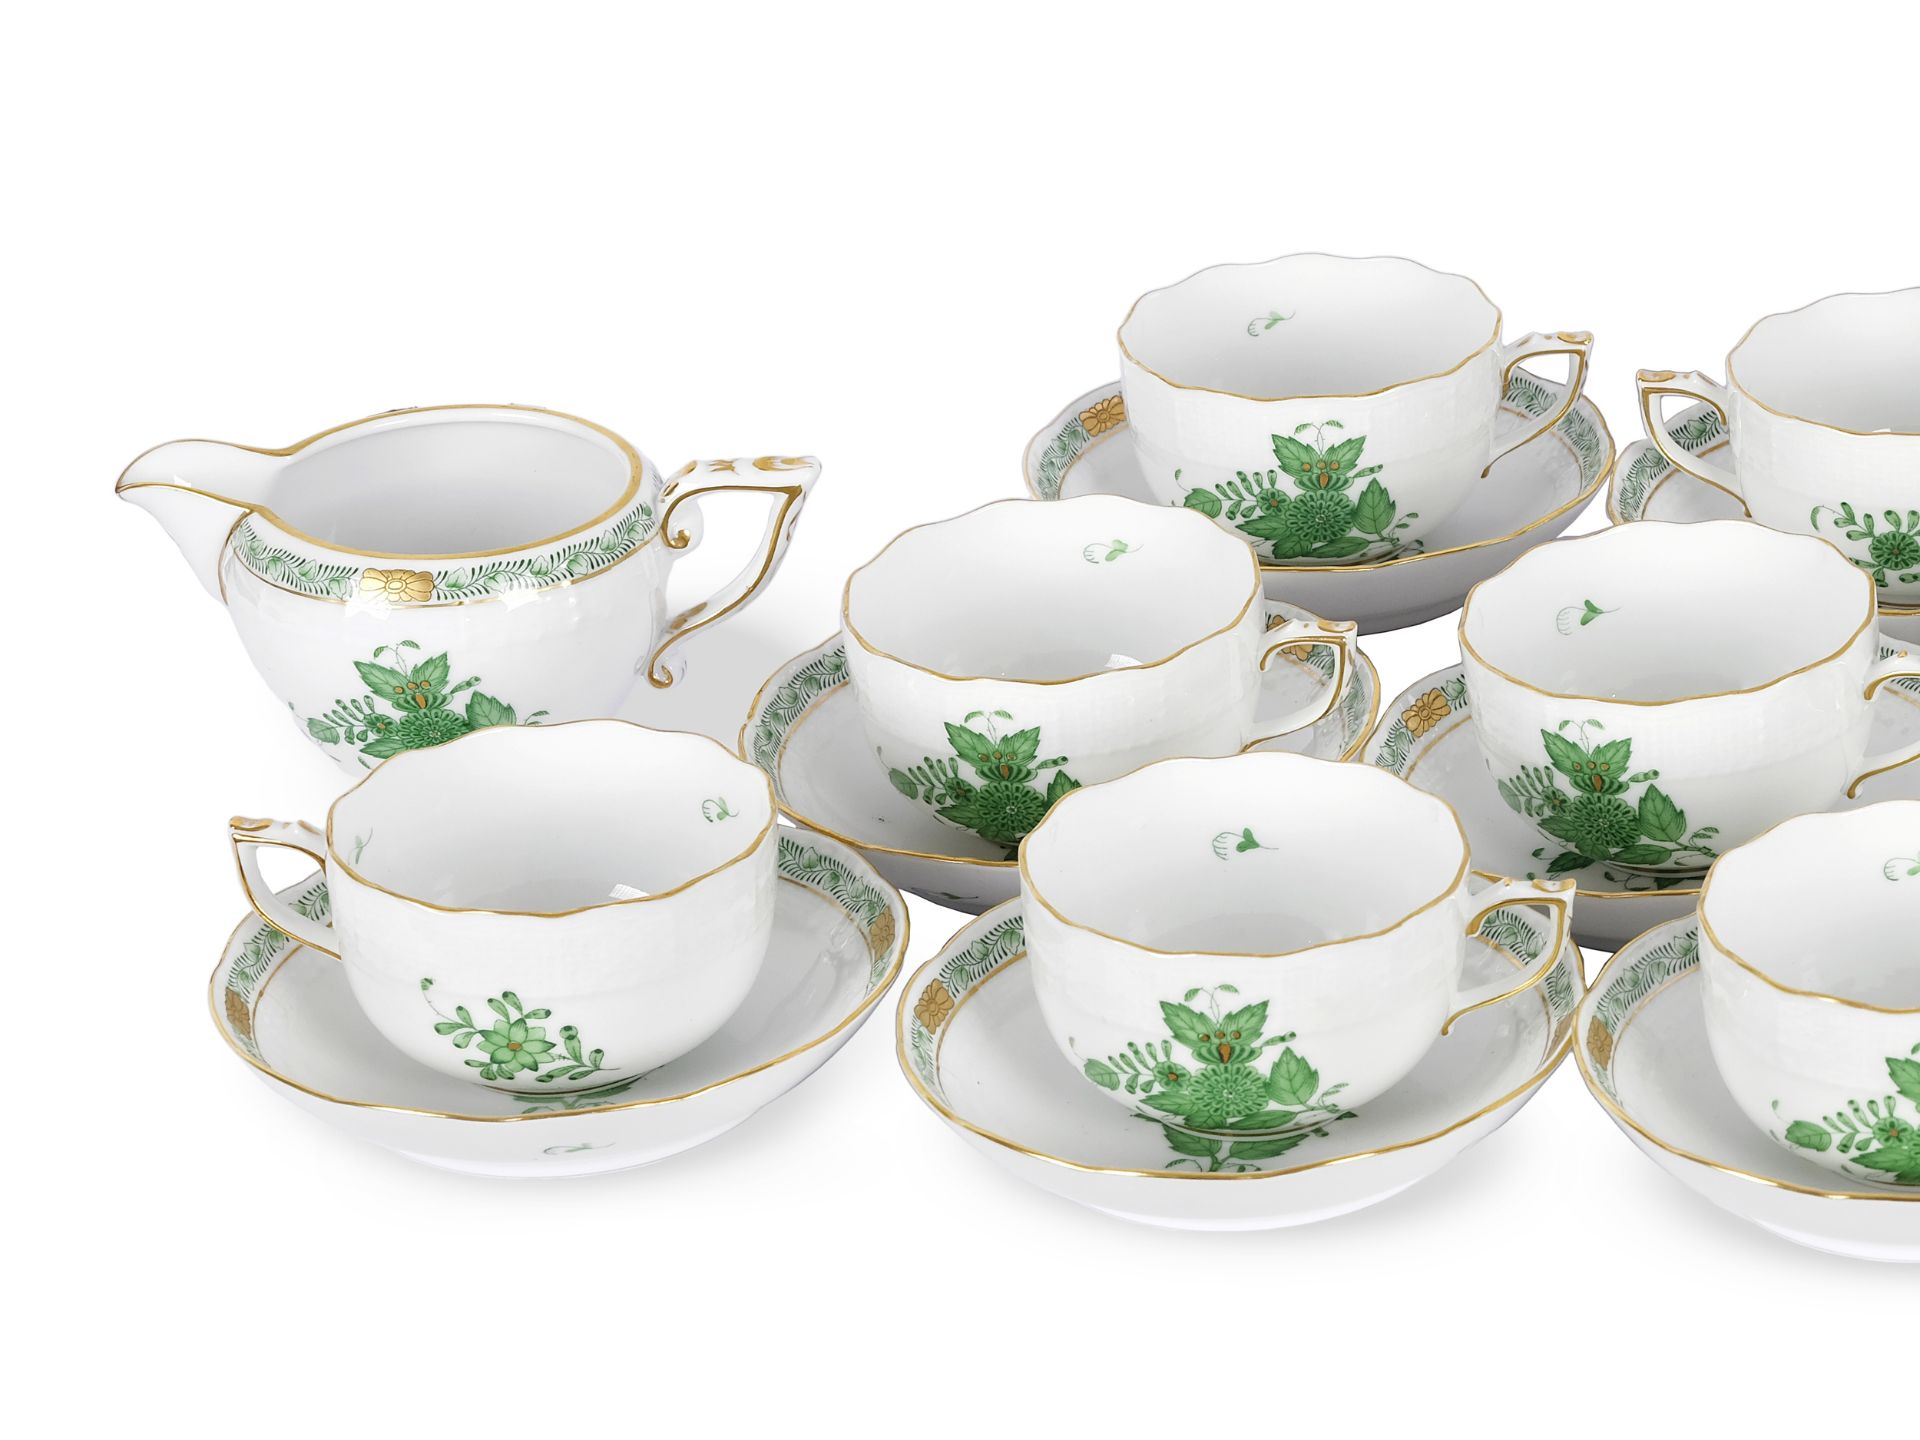 Coffee set, 39 pieces, Herend, Apponyi Vert - Image 2 of 7